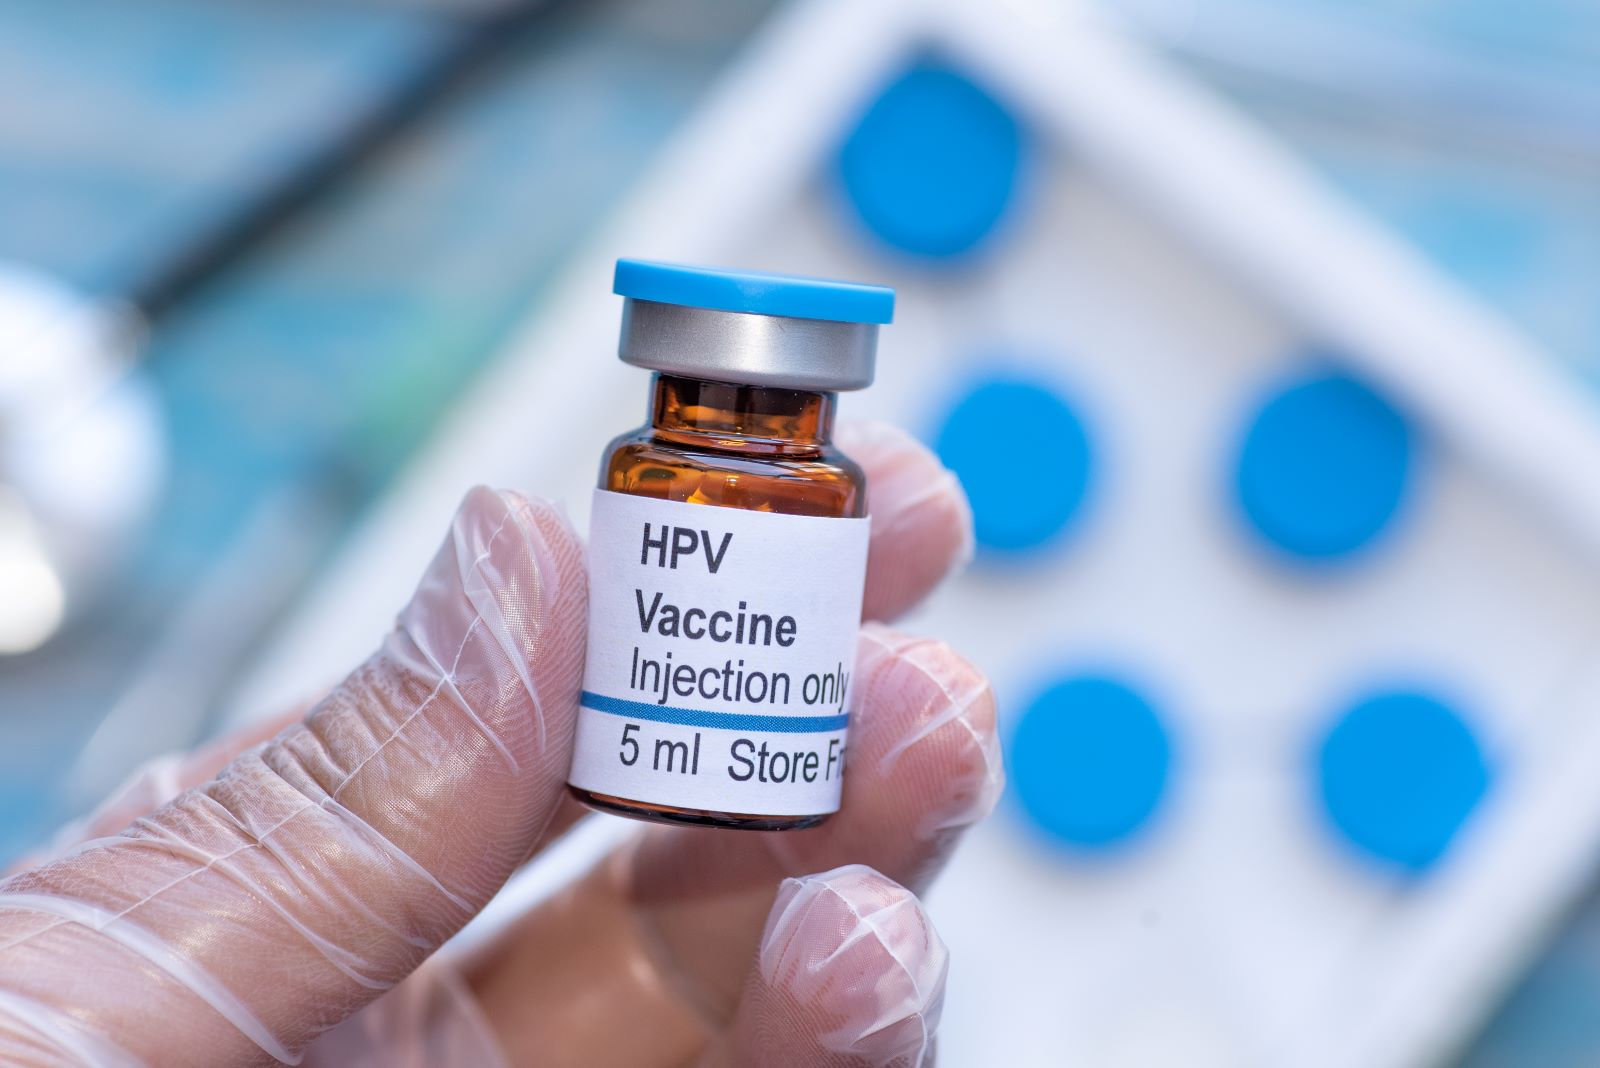 HPV Vaccine Credited With Drastic Drop in Cervical Cancer in Young Women